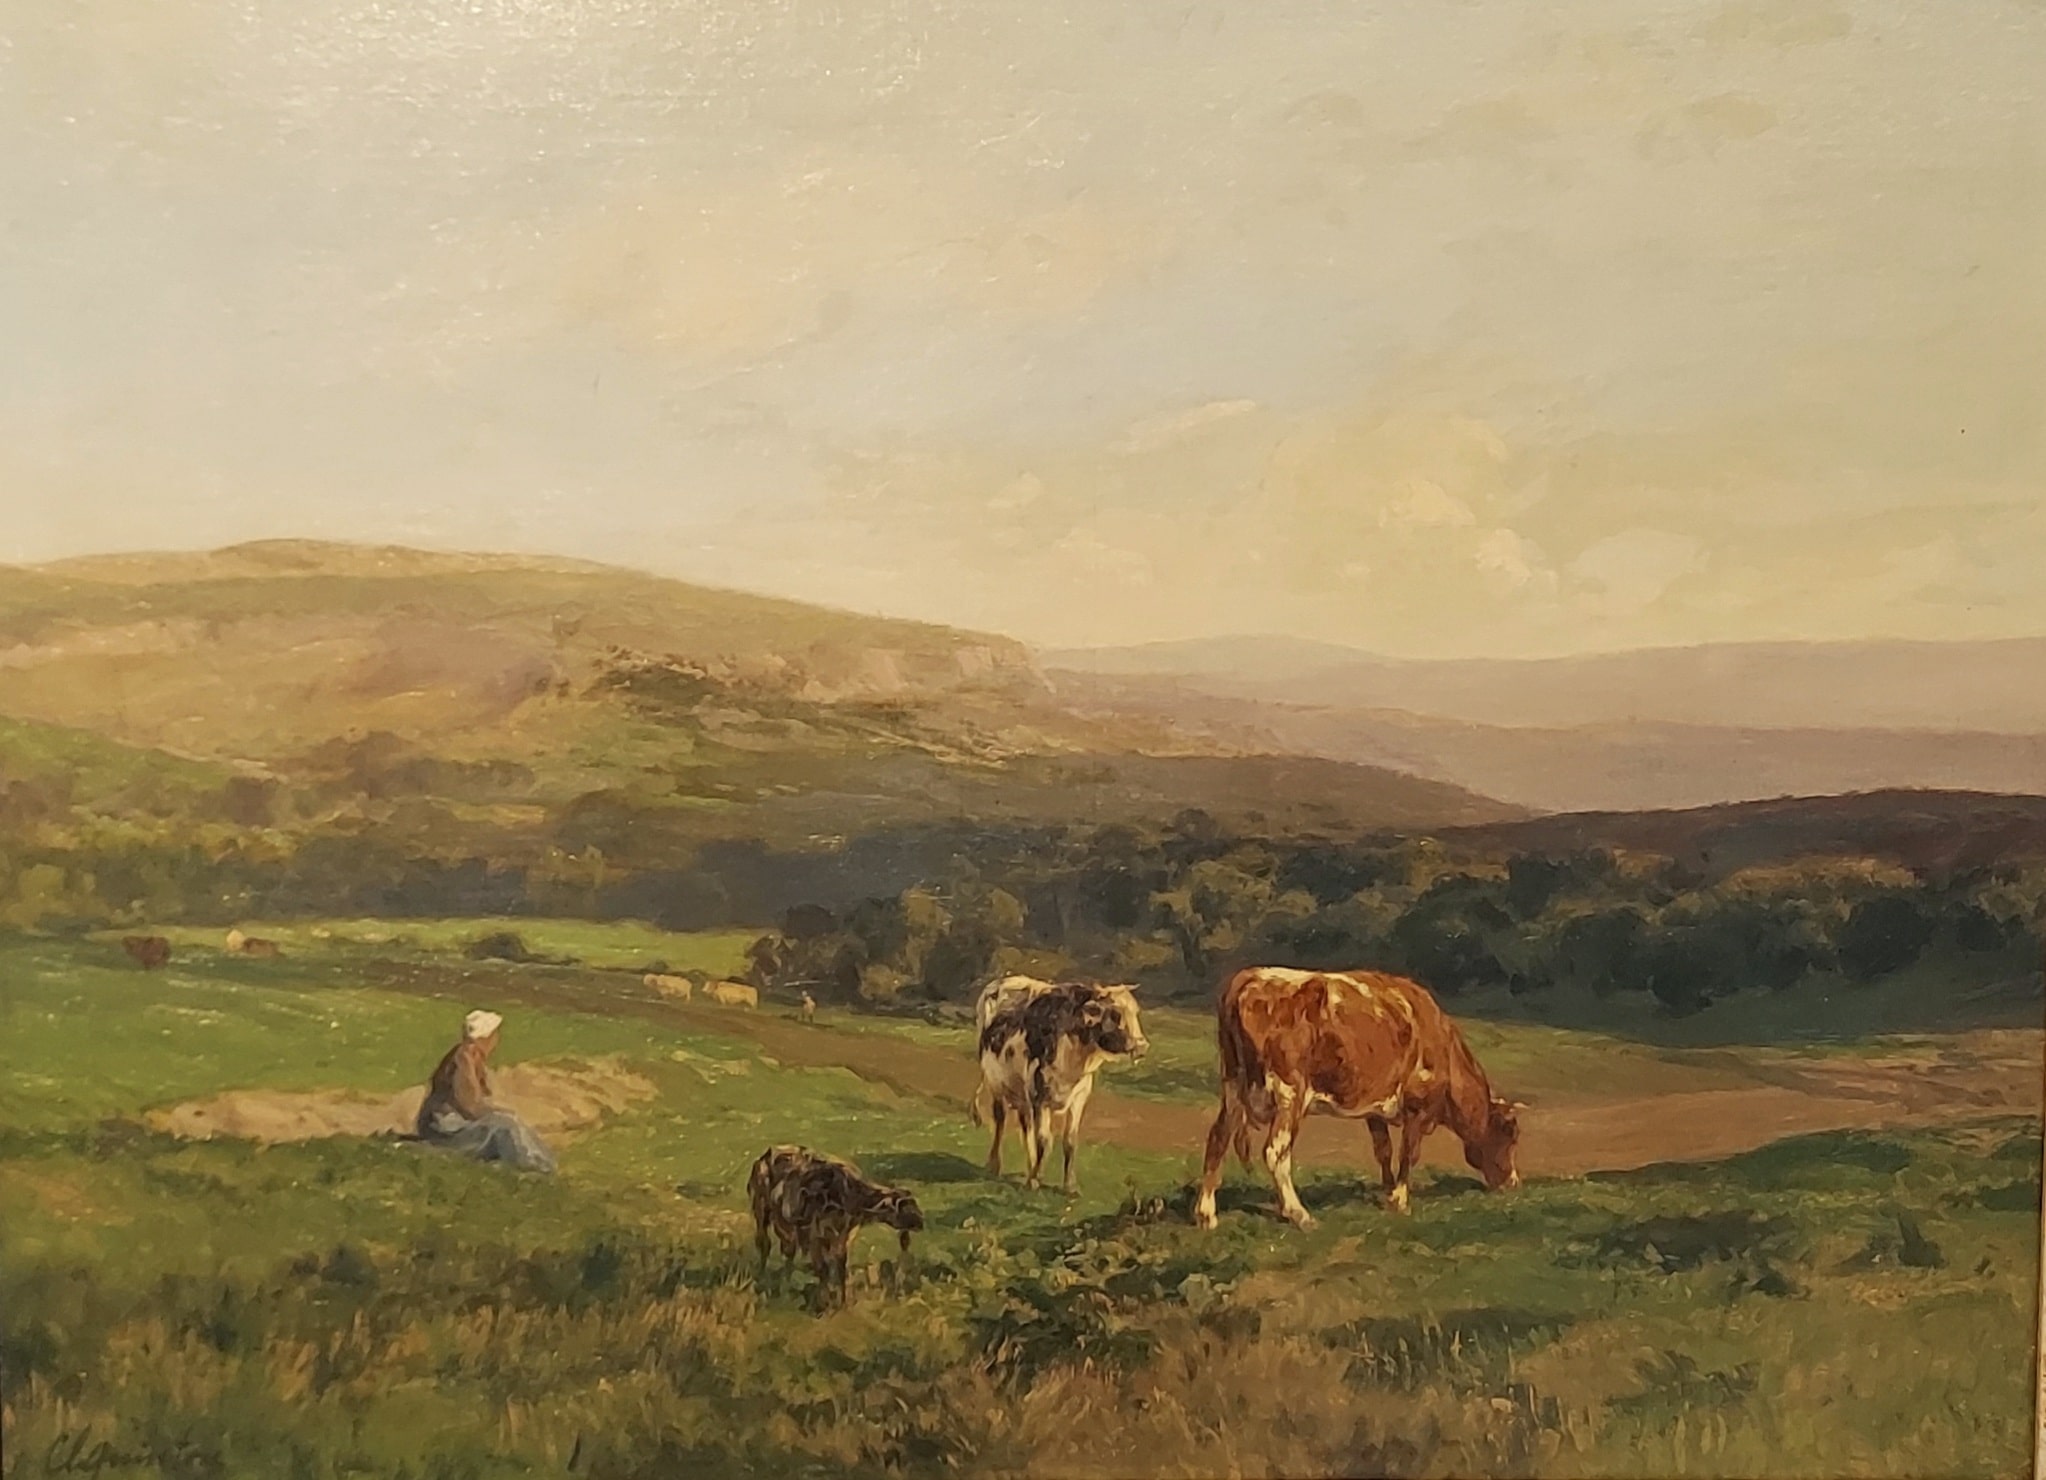 Clément Charles-Henri Quinton (French, 1851-1921), Landscape with Shepherdess and Herd, Oil on canvas laid on panel, Gift of John Daniel Tilford in memory of Belle Turner Lynch ('61, H'10), Collection of Oglethorpe University Museum of Art 